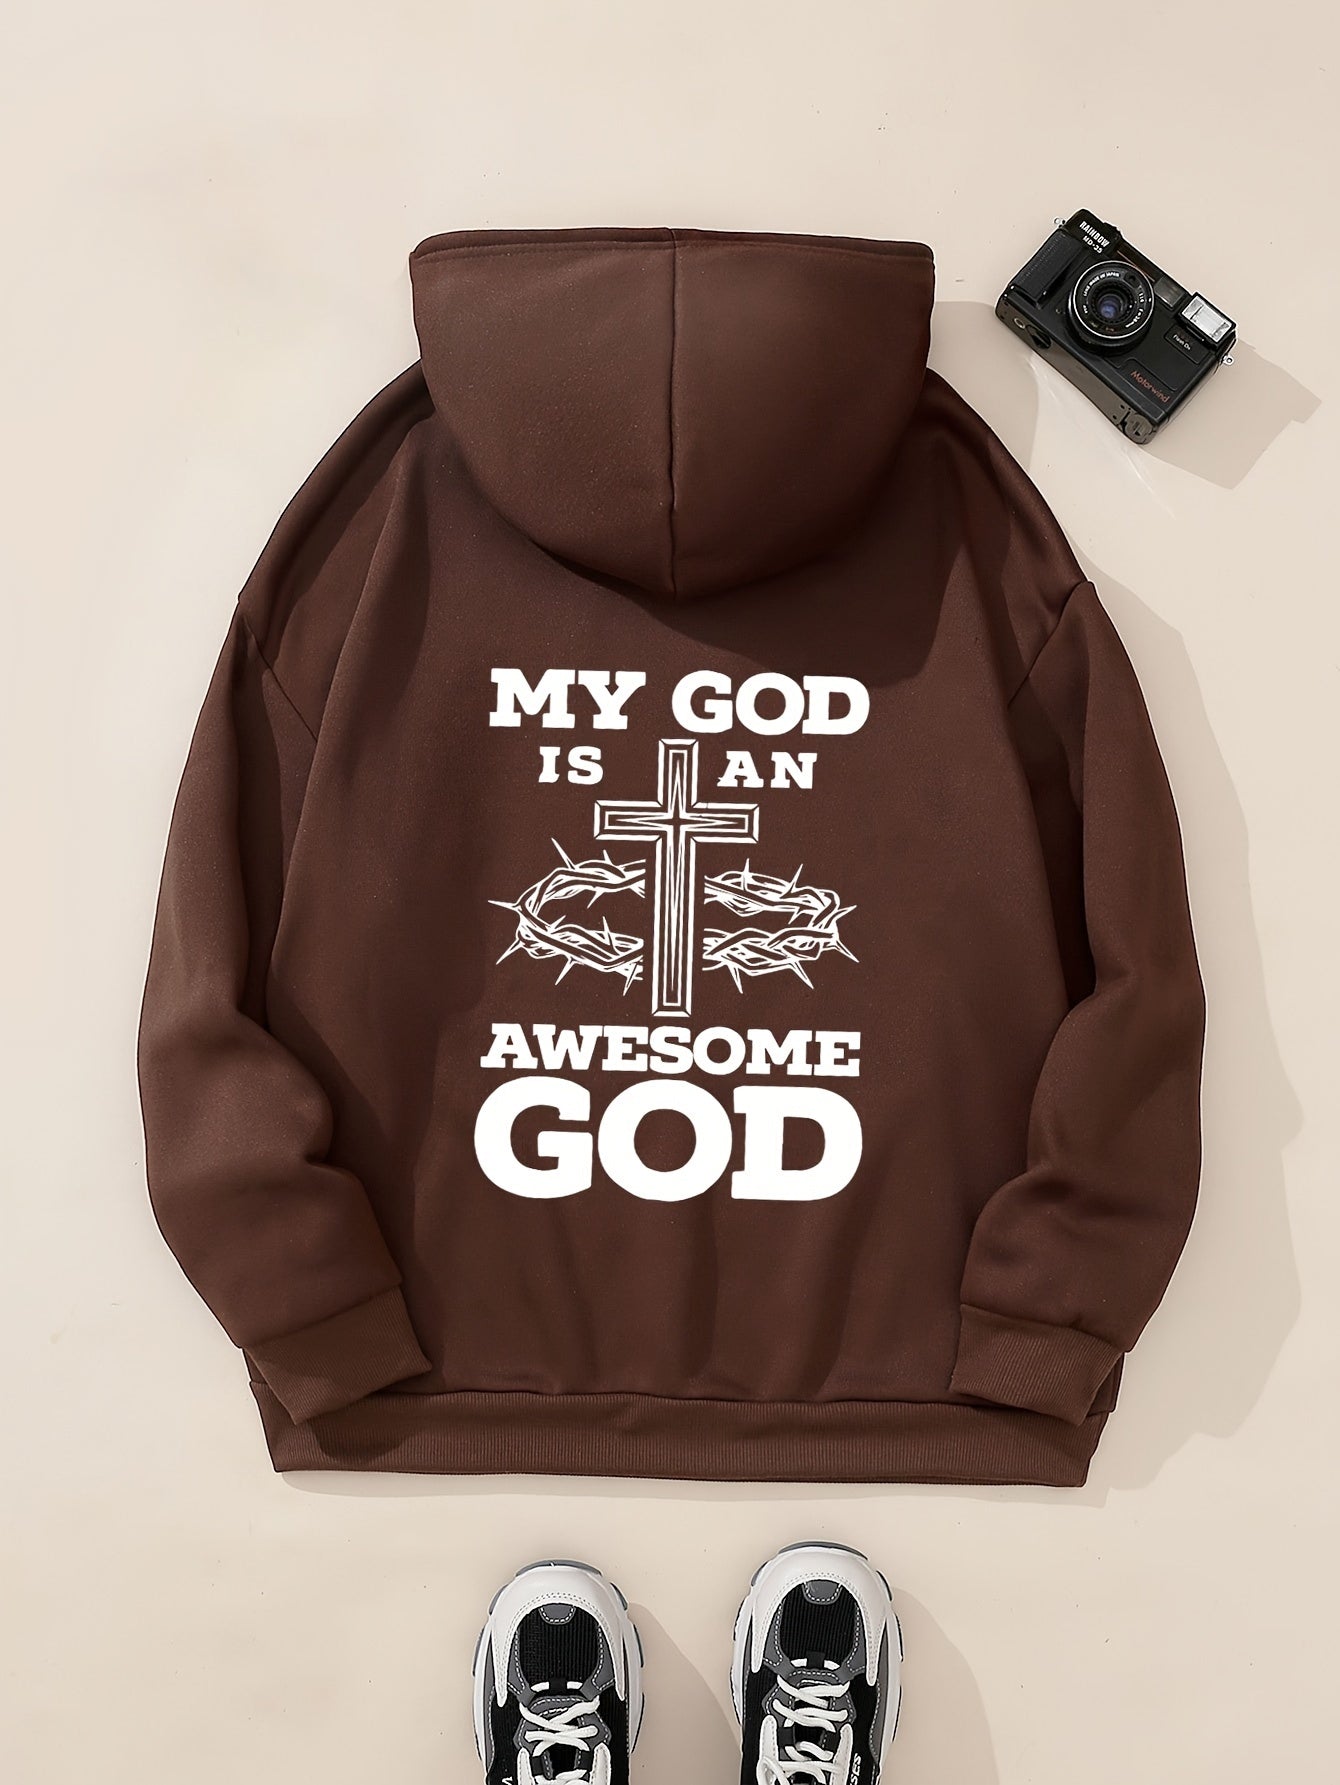 My God Is An Awesome God Plus Size Women's Christian Pullover Hooded Sweatshirt claimedbygoddesigns